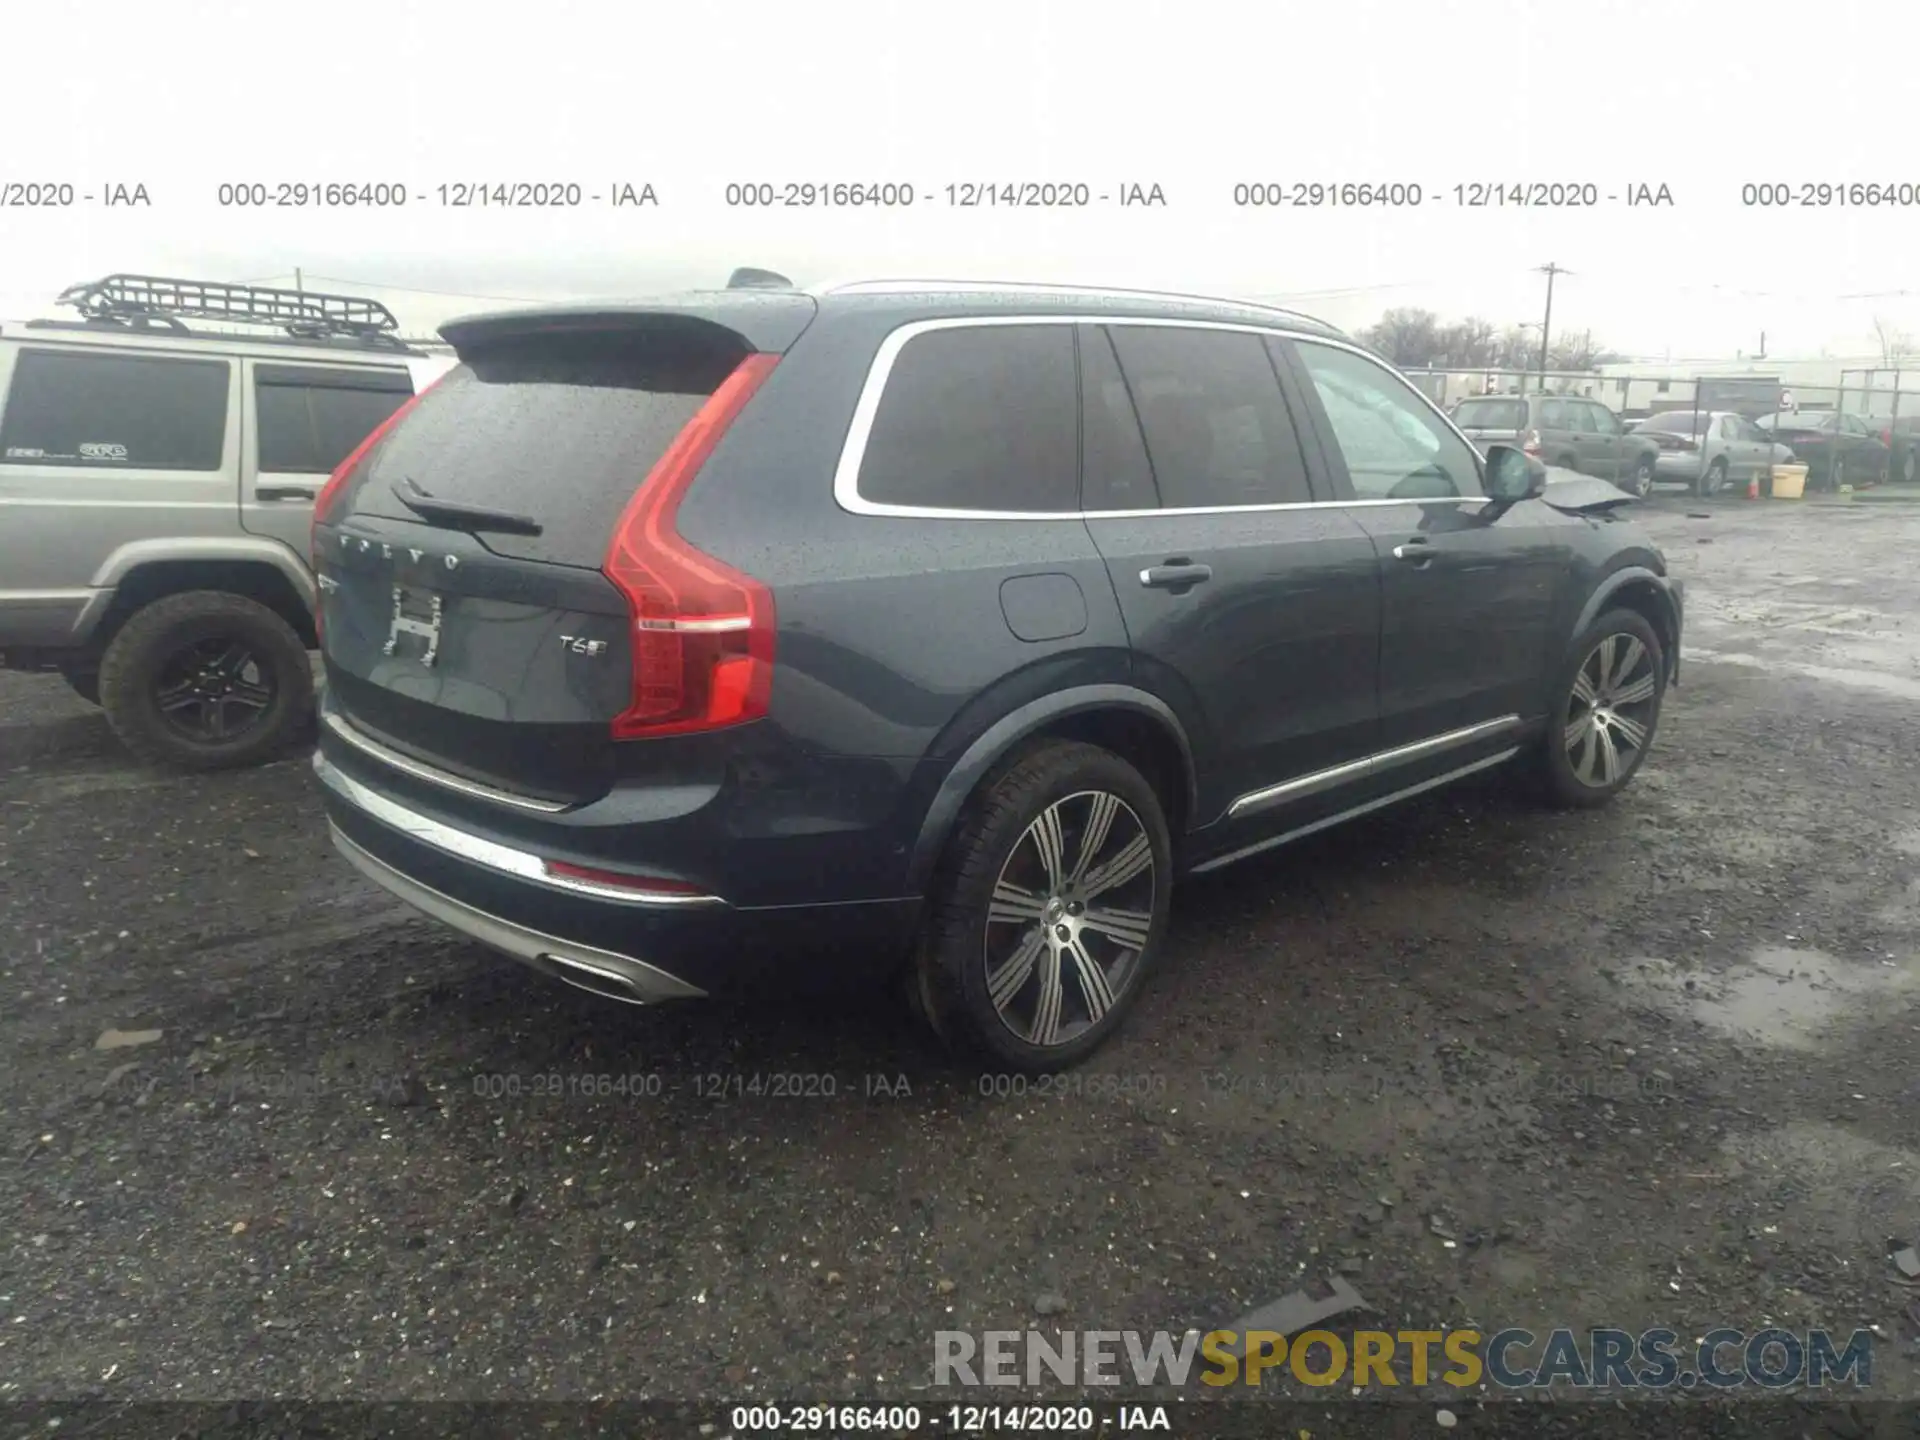 4 Photograph of a damaged car YV4A22PLXL1604144 VOLVO XC90 2020